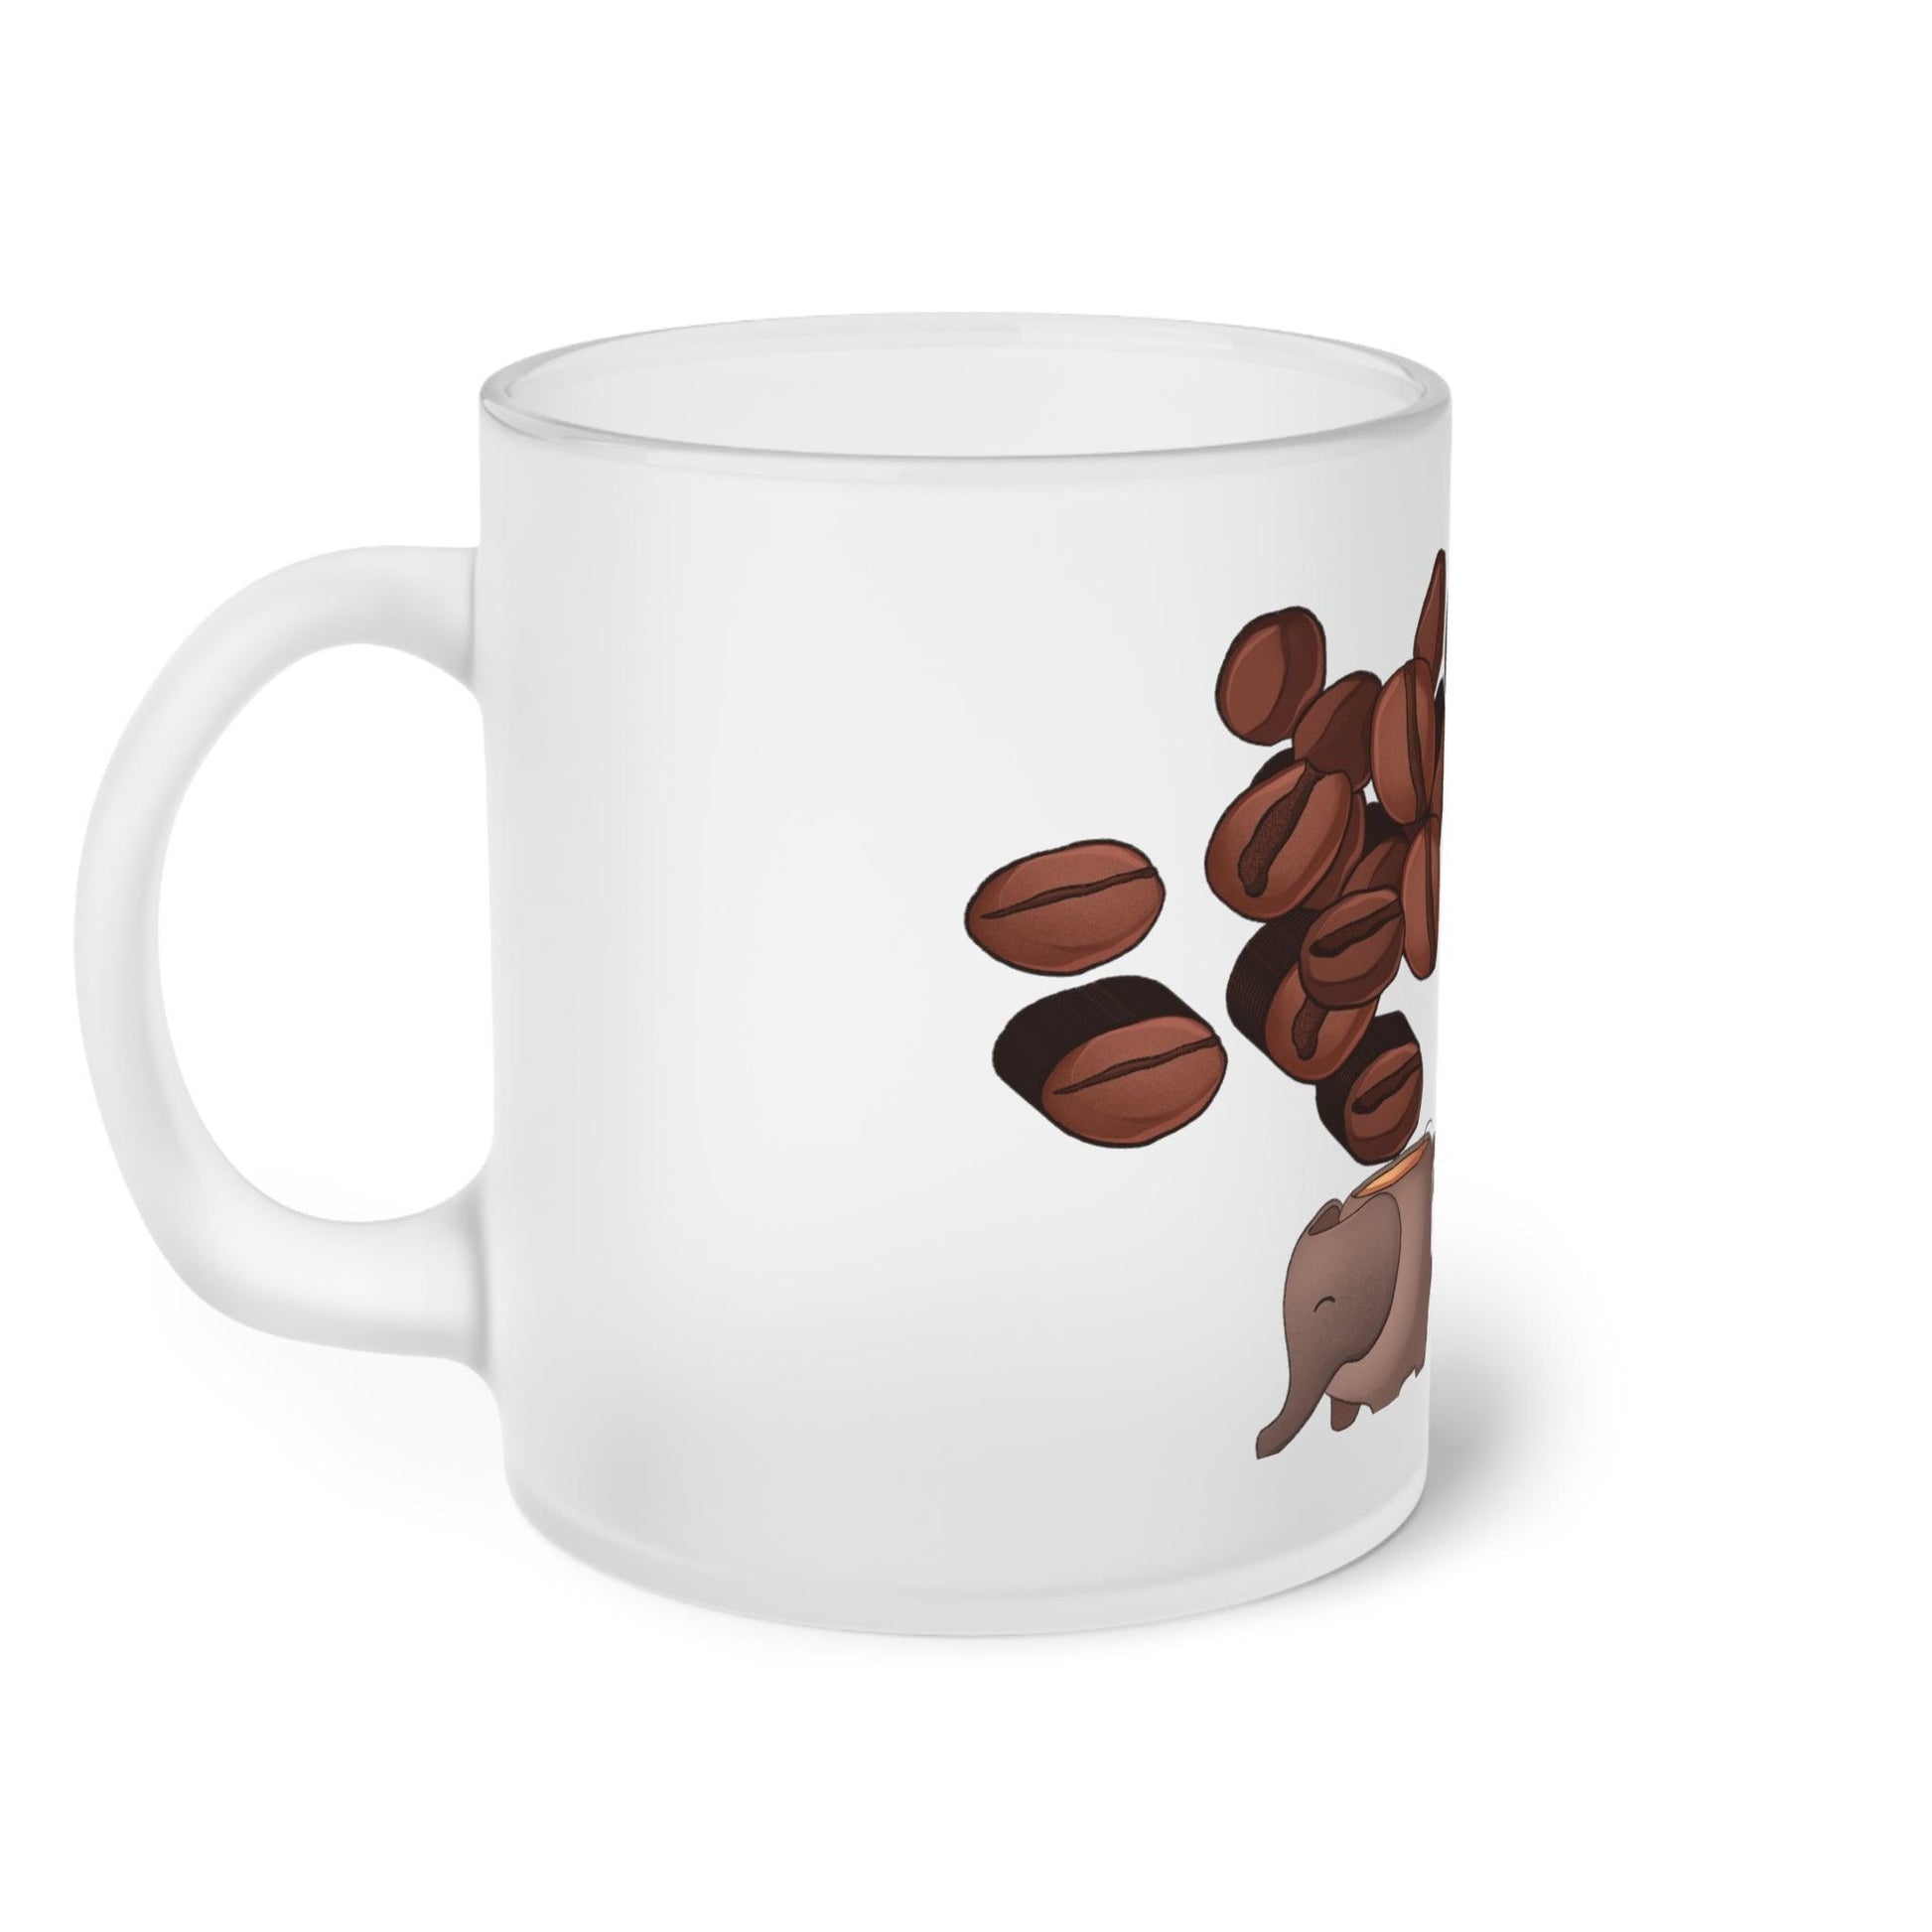 Roasted Coffee Bean Frosted Glass Mug - COFFEEBRE